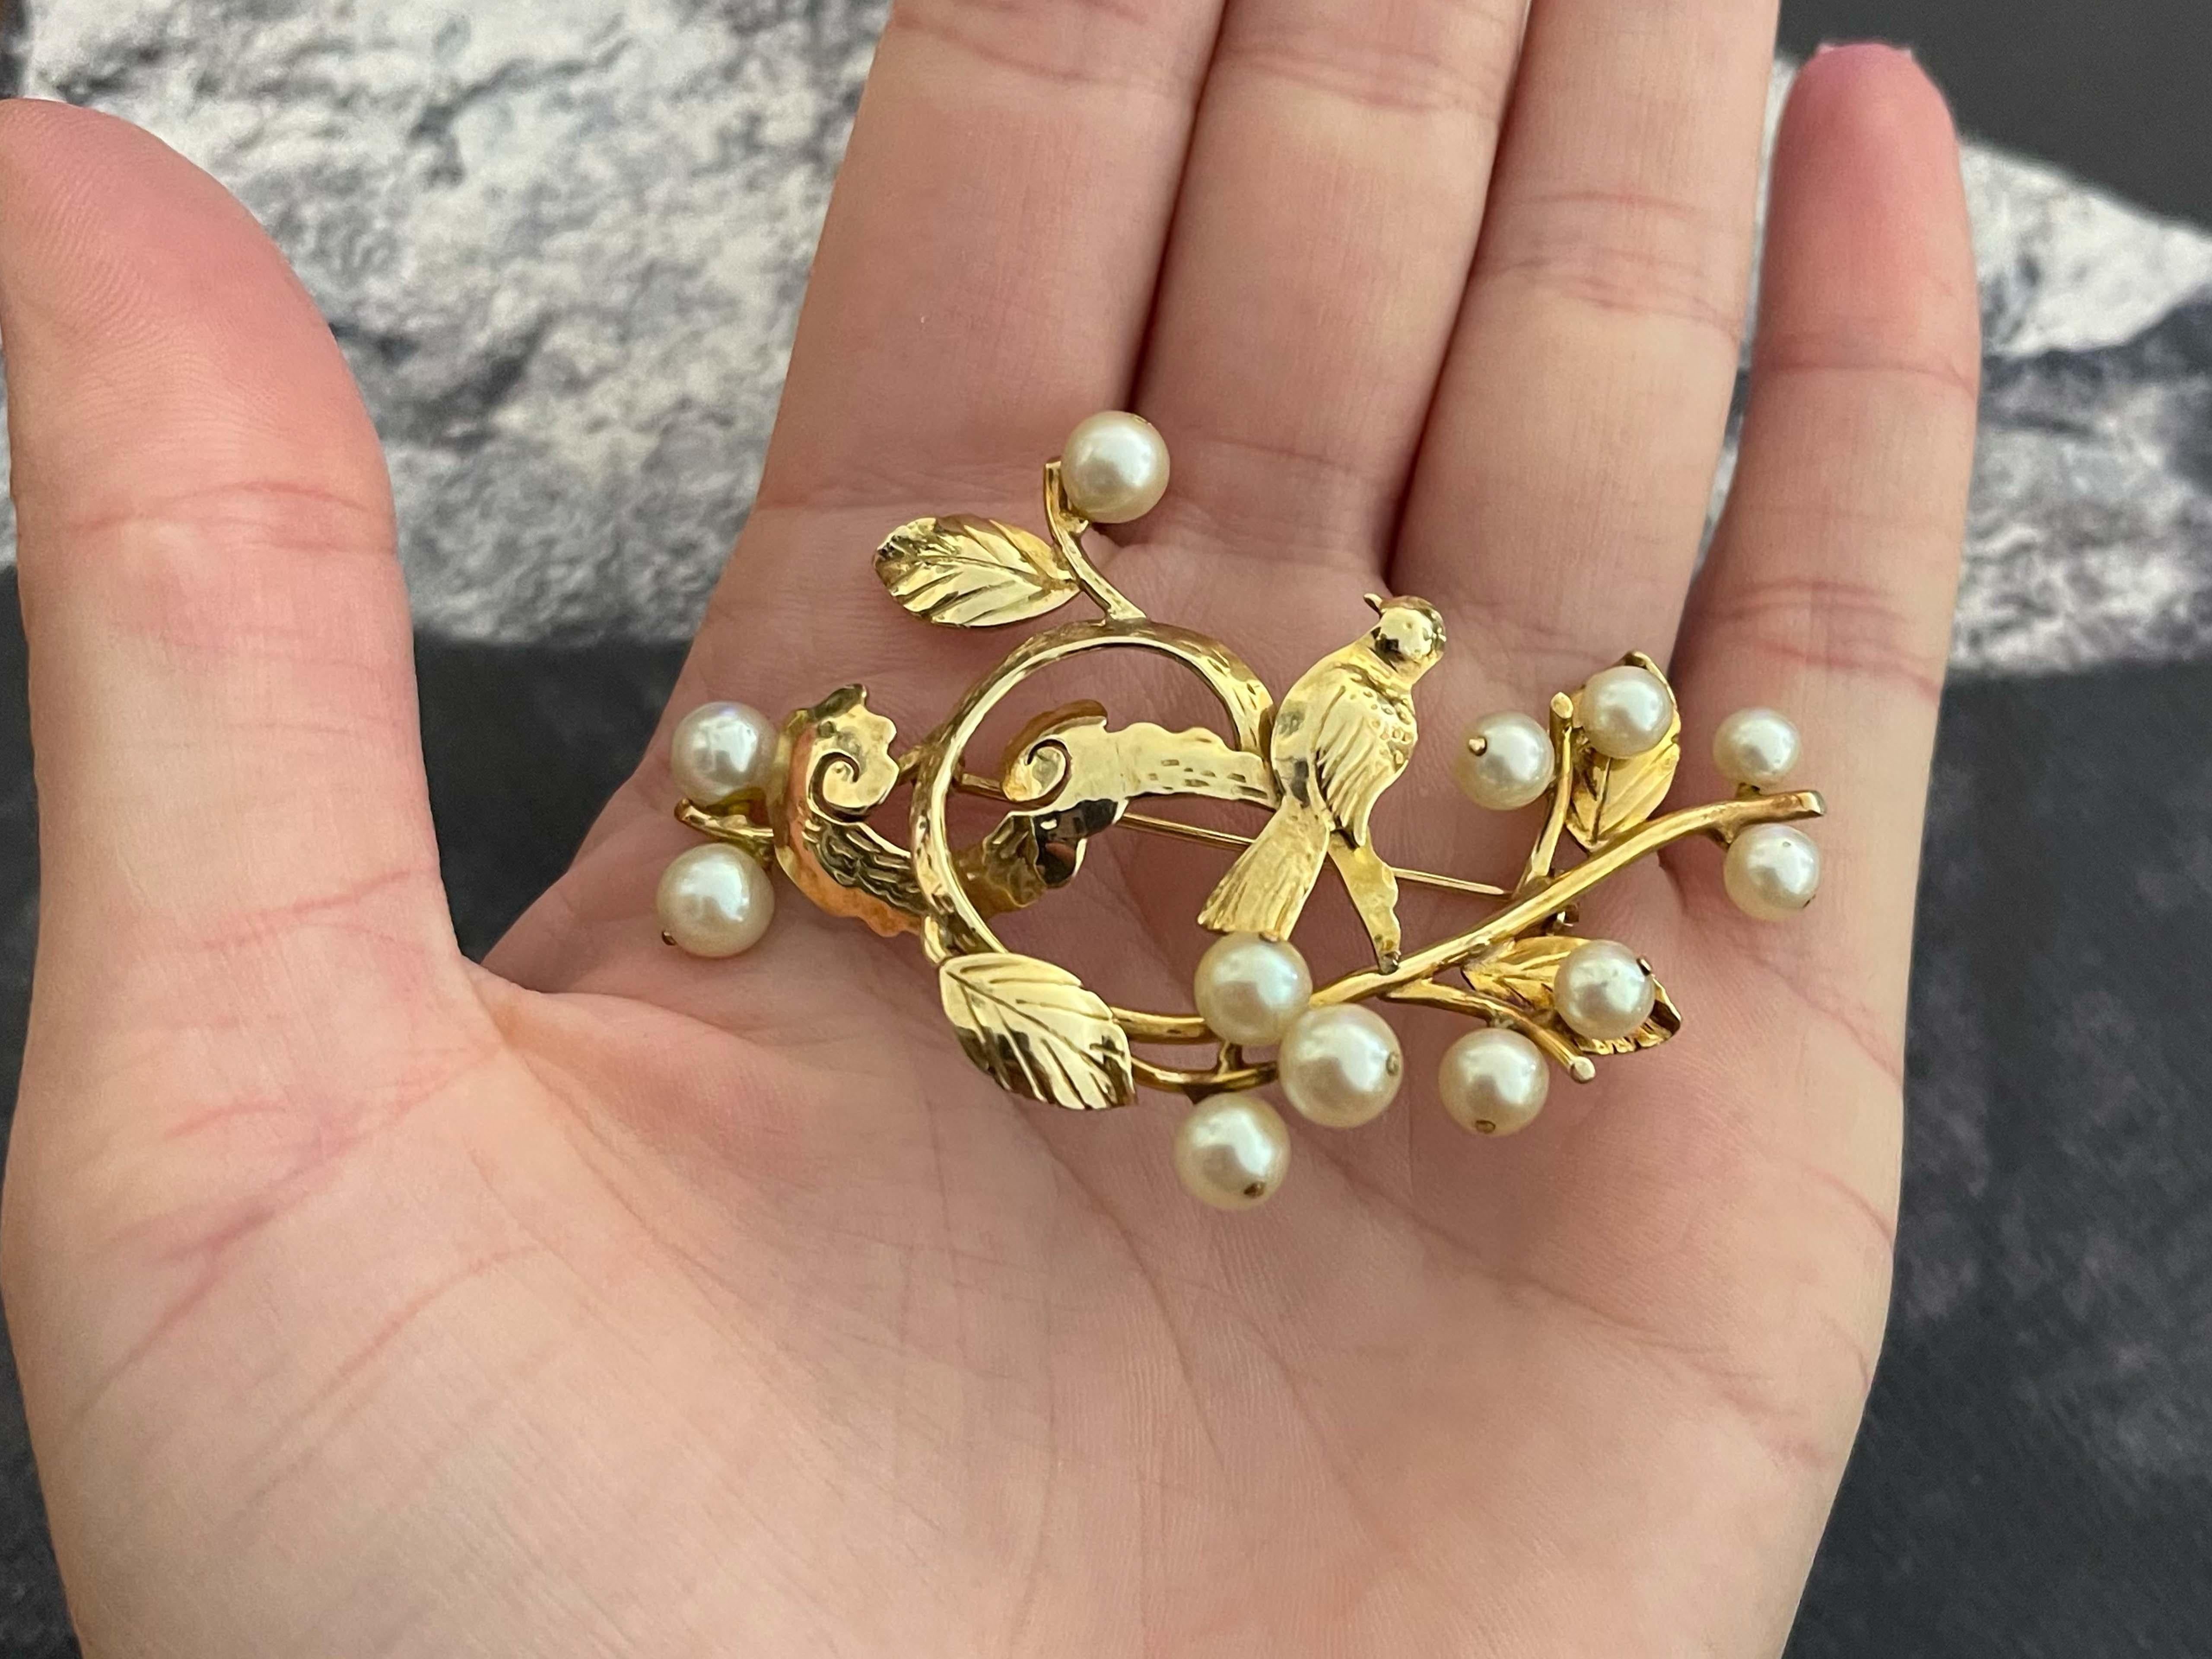 Brooch Specifications:

Designer: Ming's

Metal: 14k Yellow Gold

Total Weight: 12.2 Grams

Brooch Measurements: 2.5